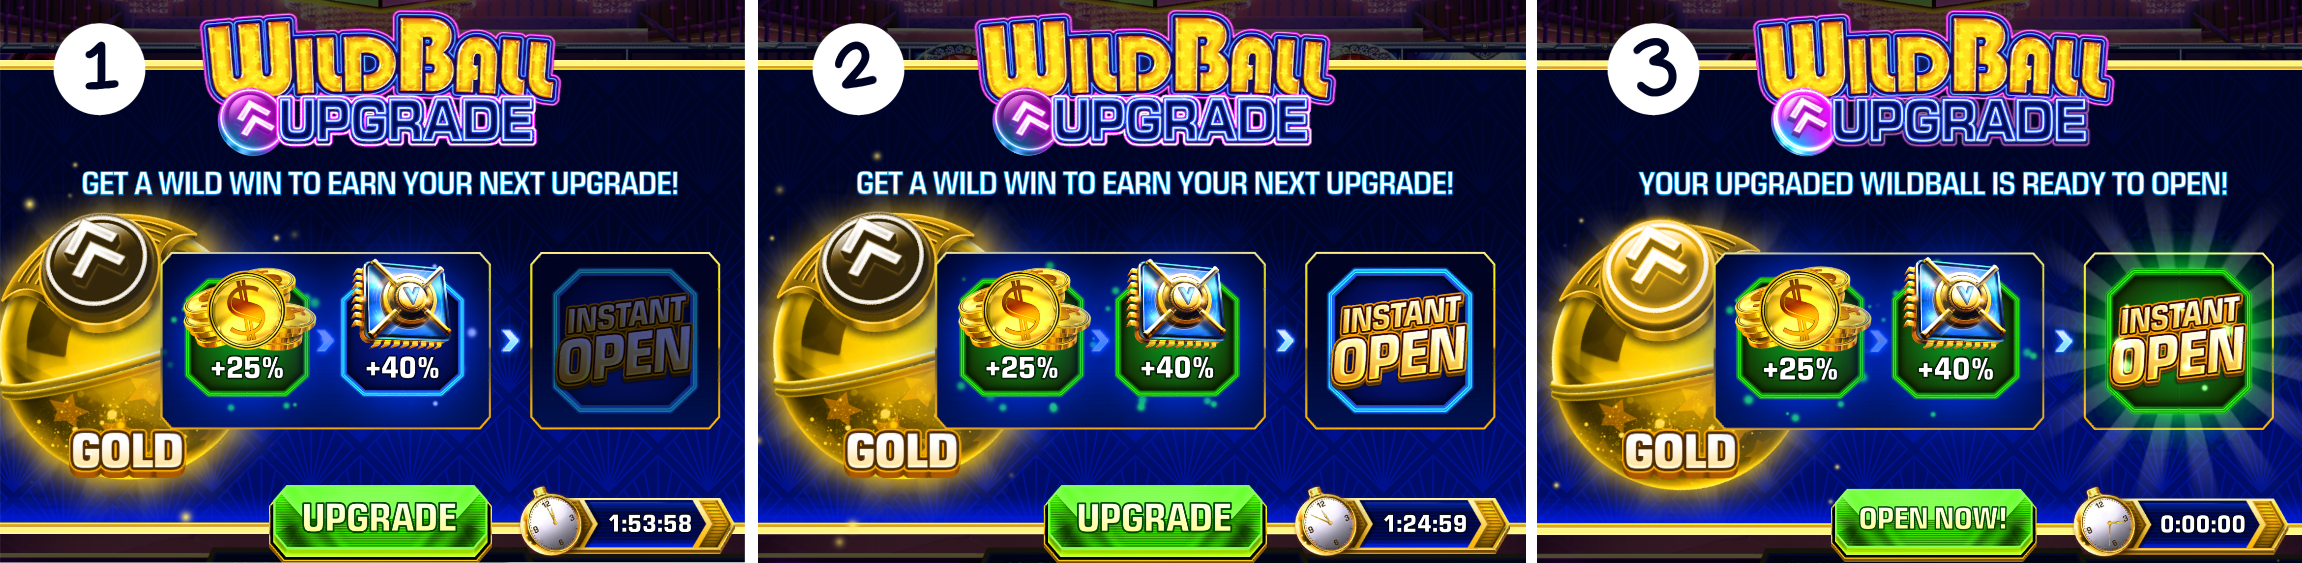 qhs-wildball_upgrade-sequence-1-2-3.png